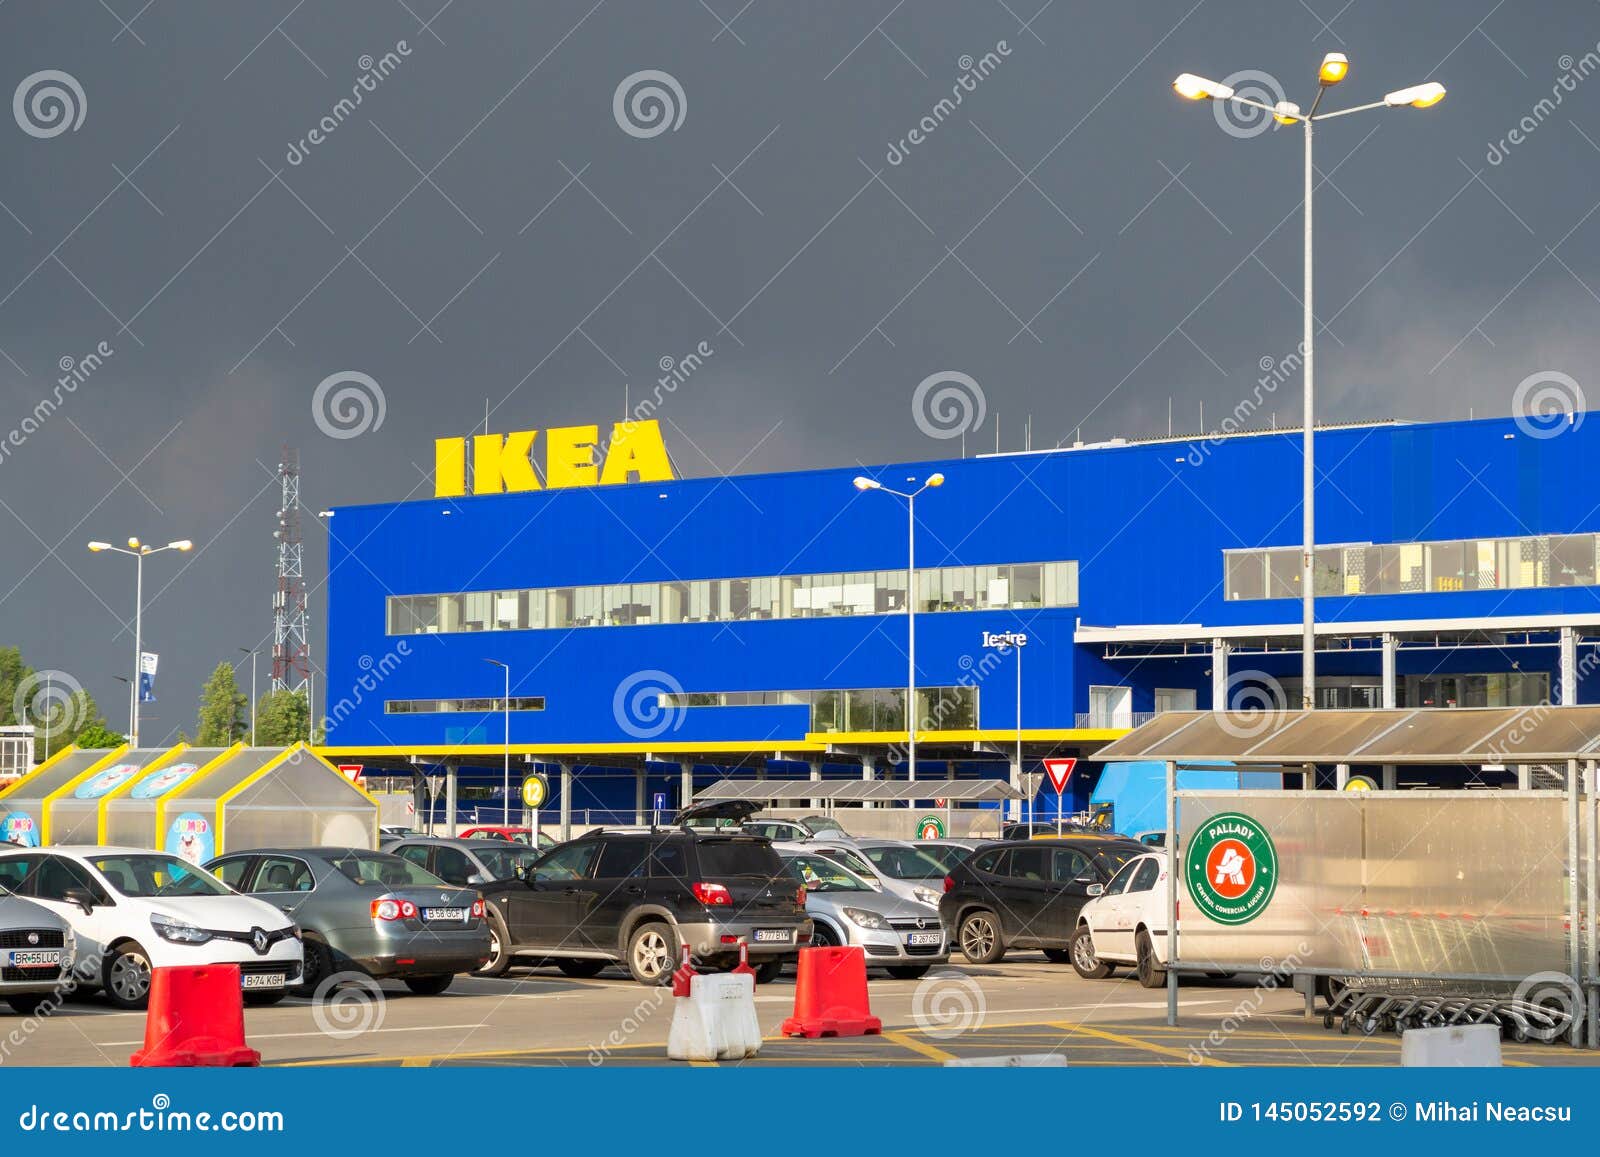 rookie new Zealand album IKEA Pallady, the Second IKEA Store To Open in 2019 in Bucuresti, Romania -  Outside View. Editorial Photography - Image of design, house: 145052592